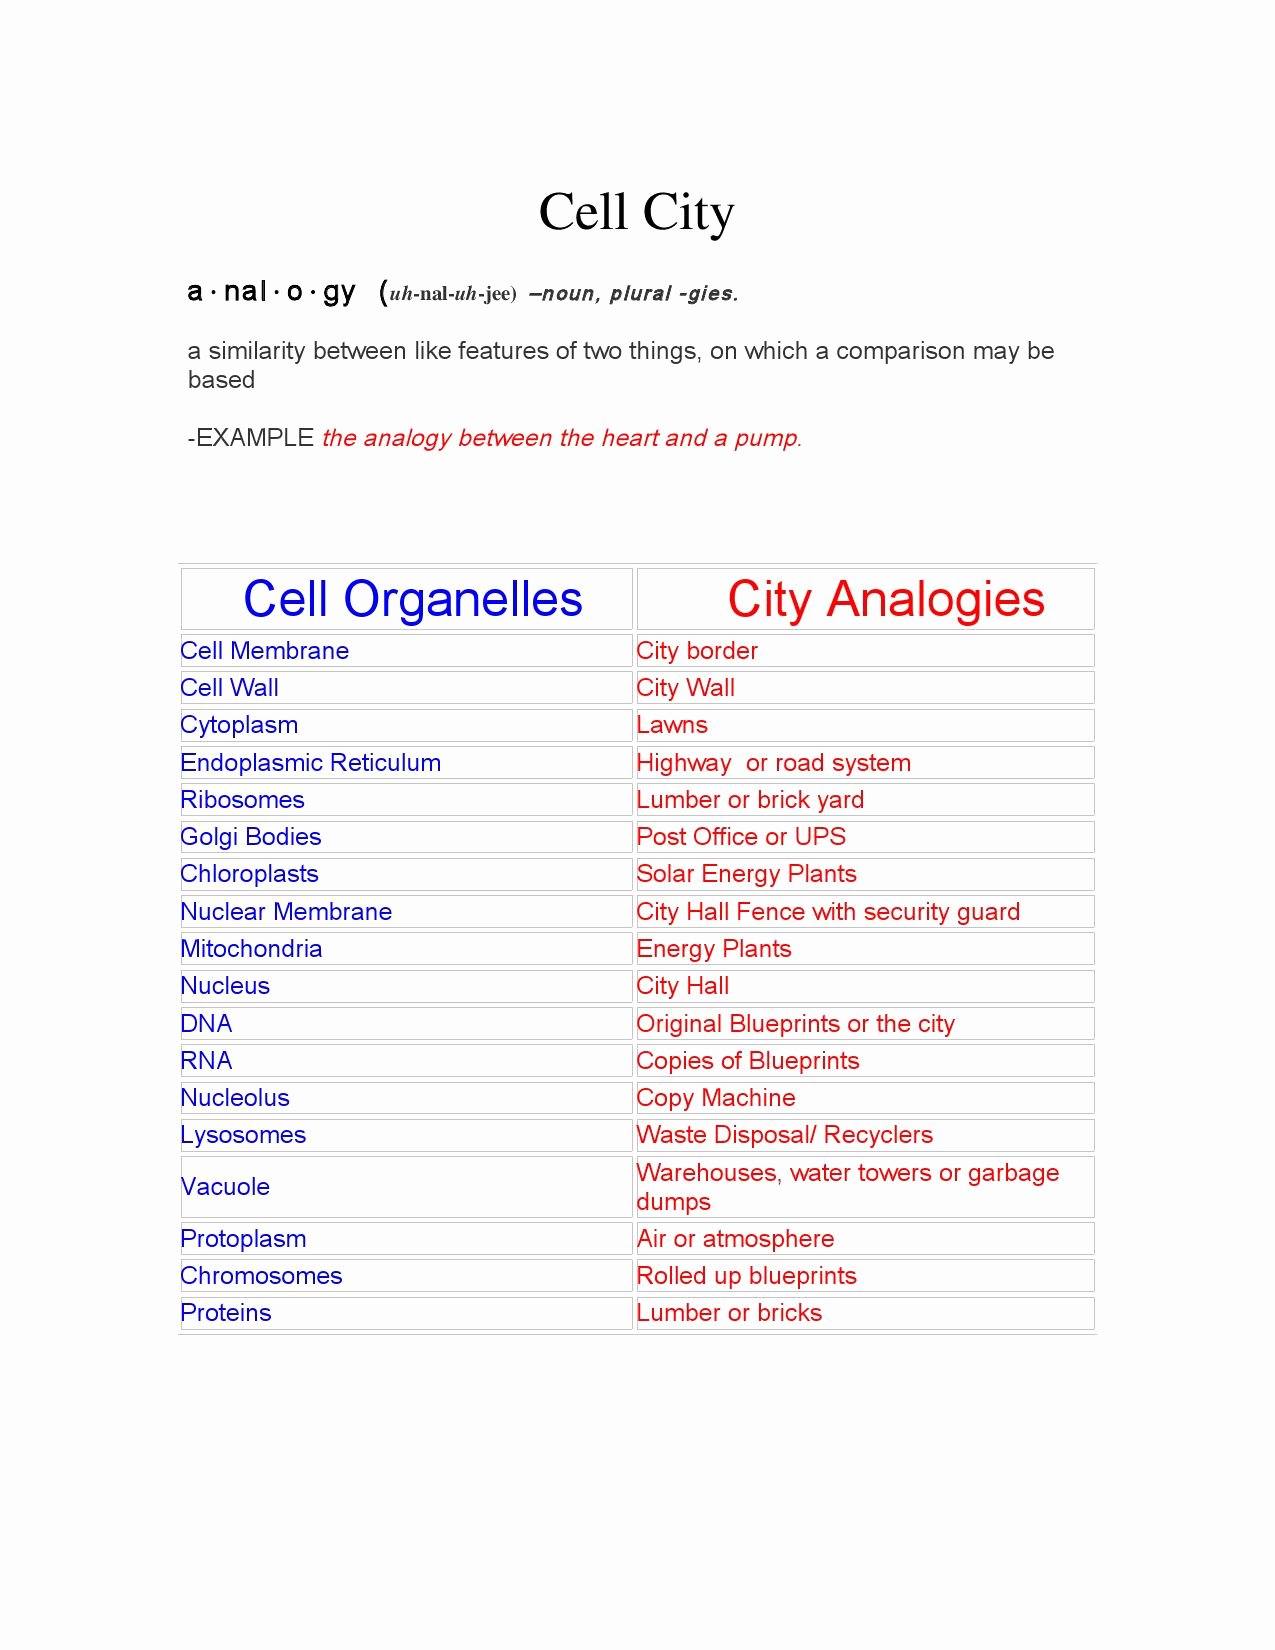 Cell City Analogy Worksheet Answers New Cell City 2 by Steven Fitch issuu